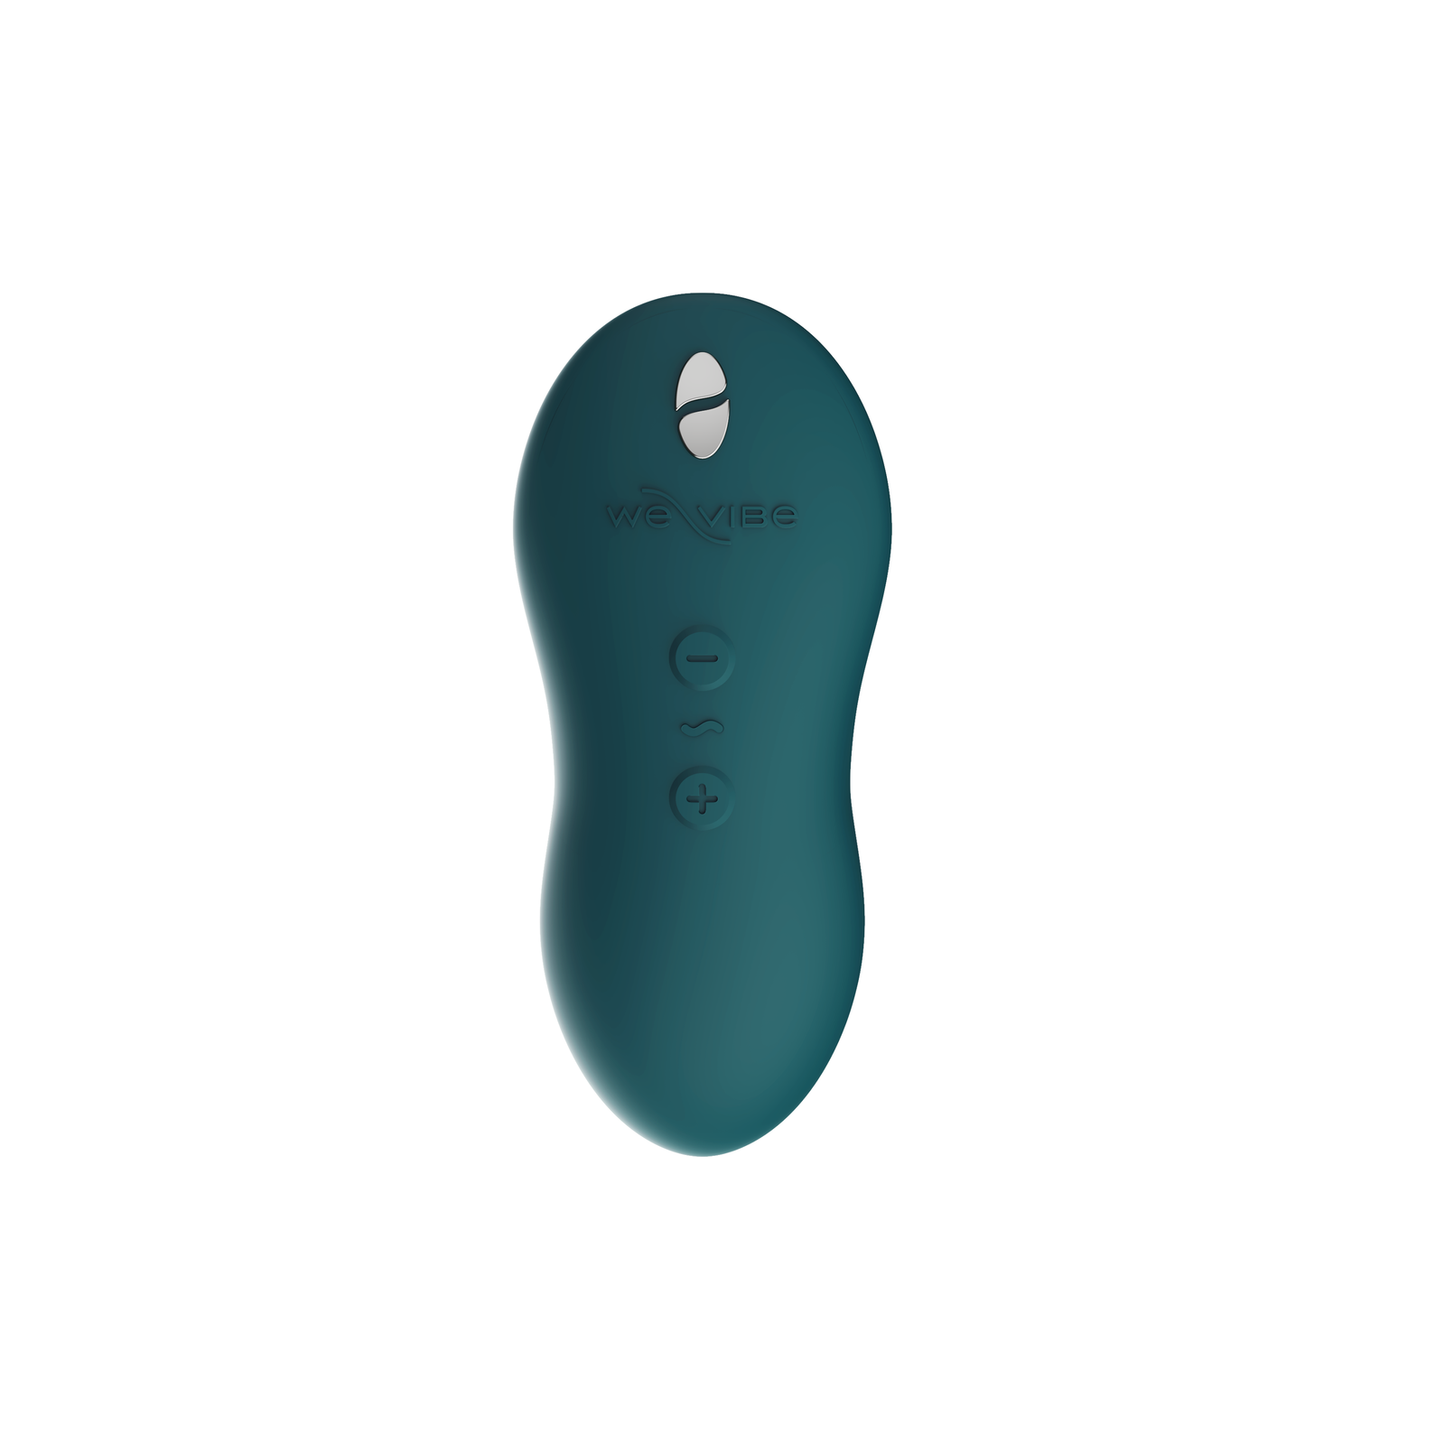 We-Vibe Touch X Intimate Massager  - Club X